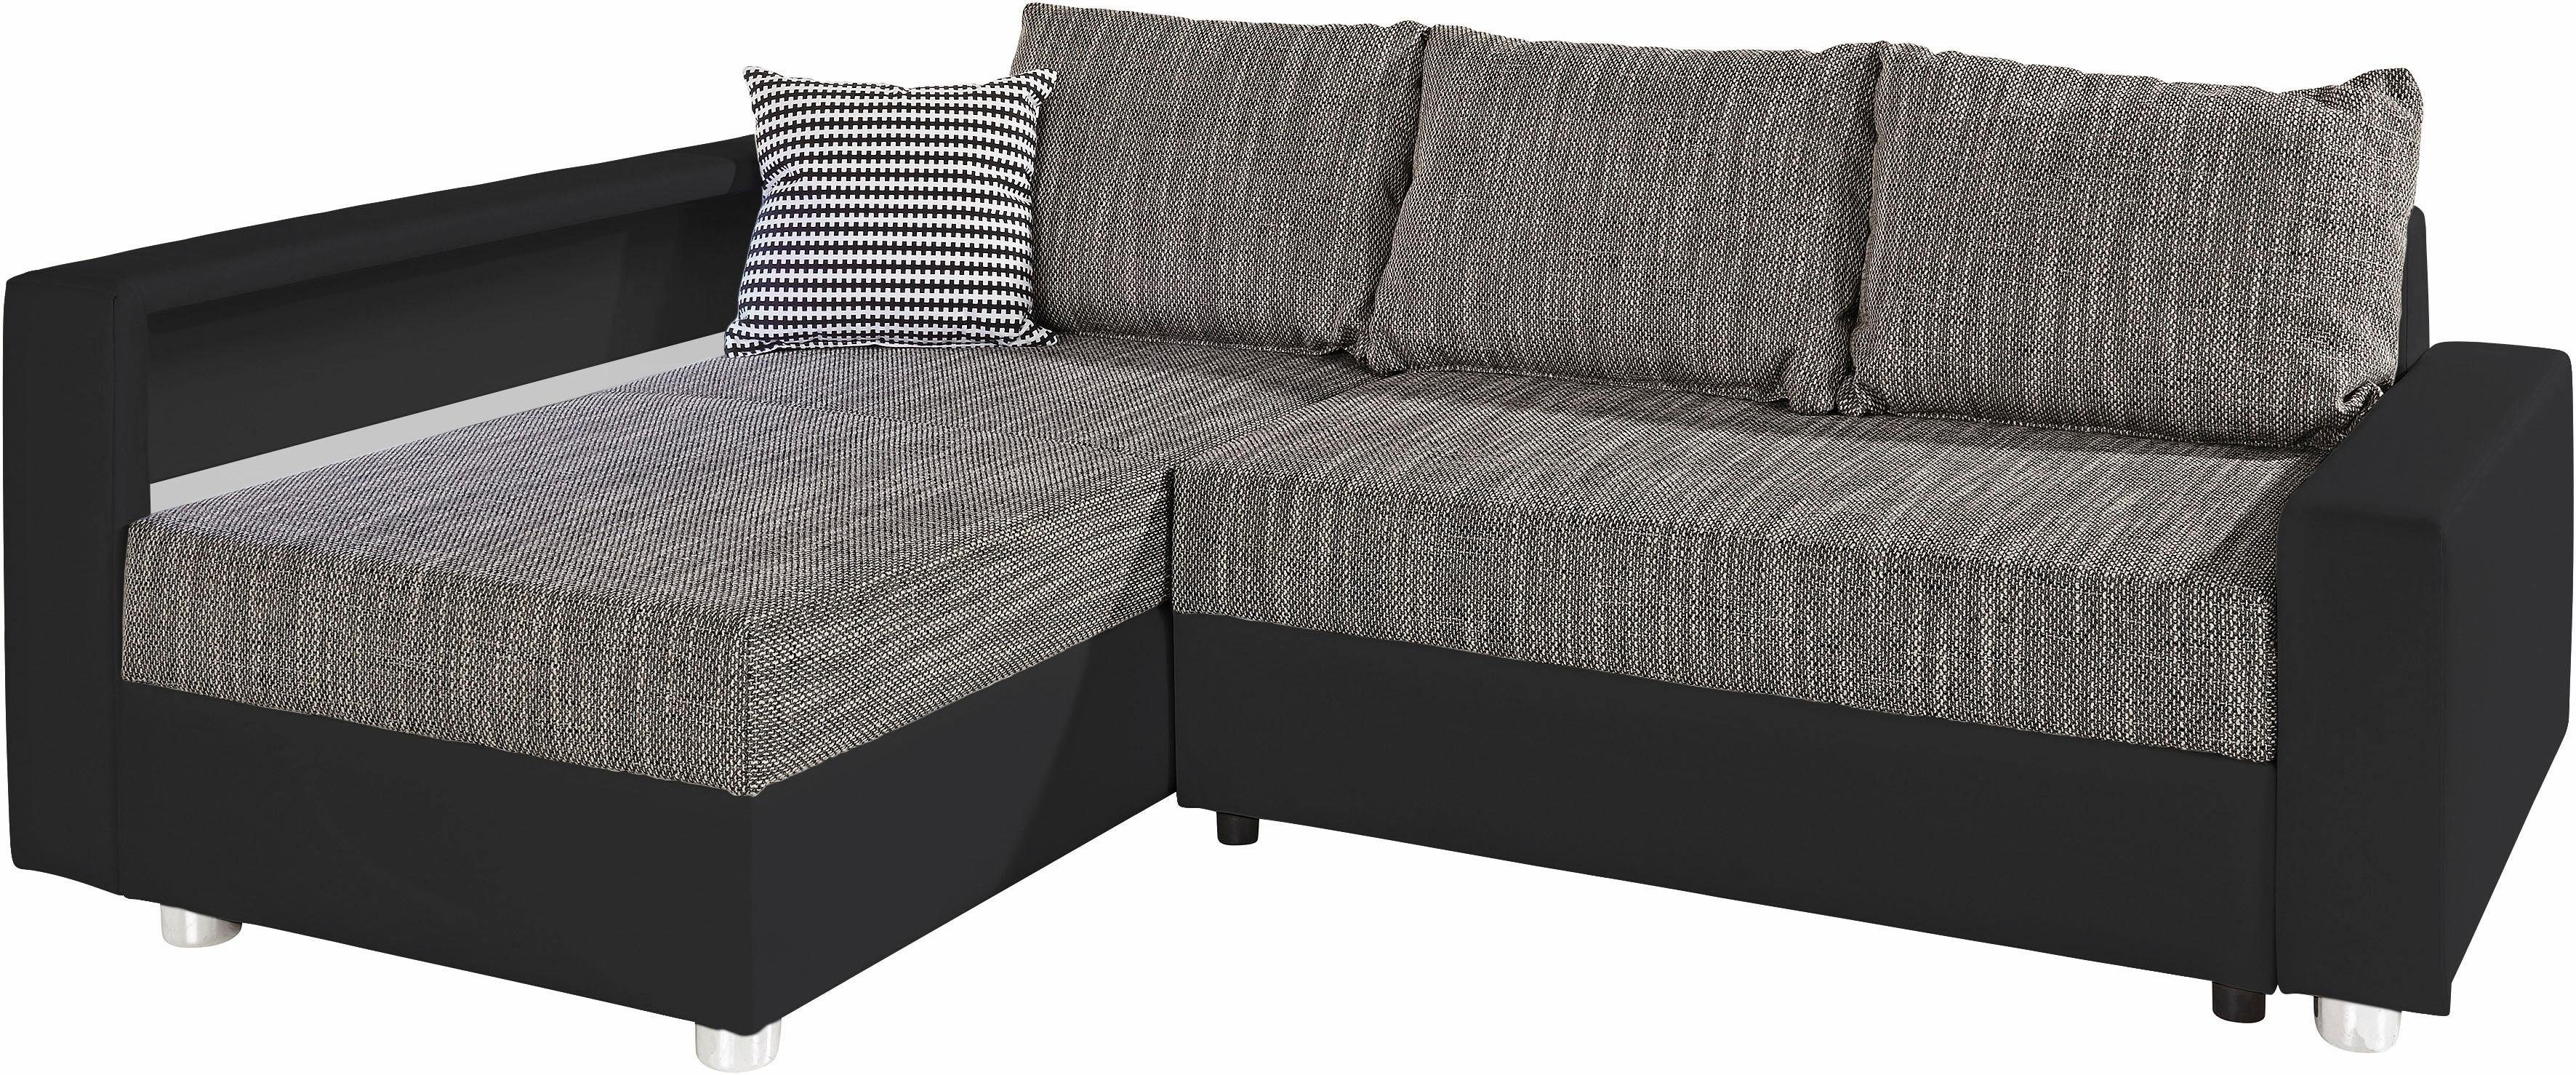 wahlweise Bettfunktion, COLLECTION AB Ecksofa mit RGB-LED-Beleuchtung inklusive Relax, Federkern,